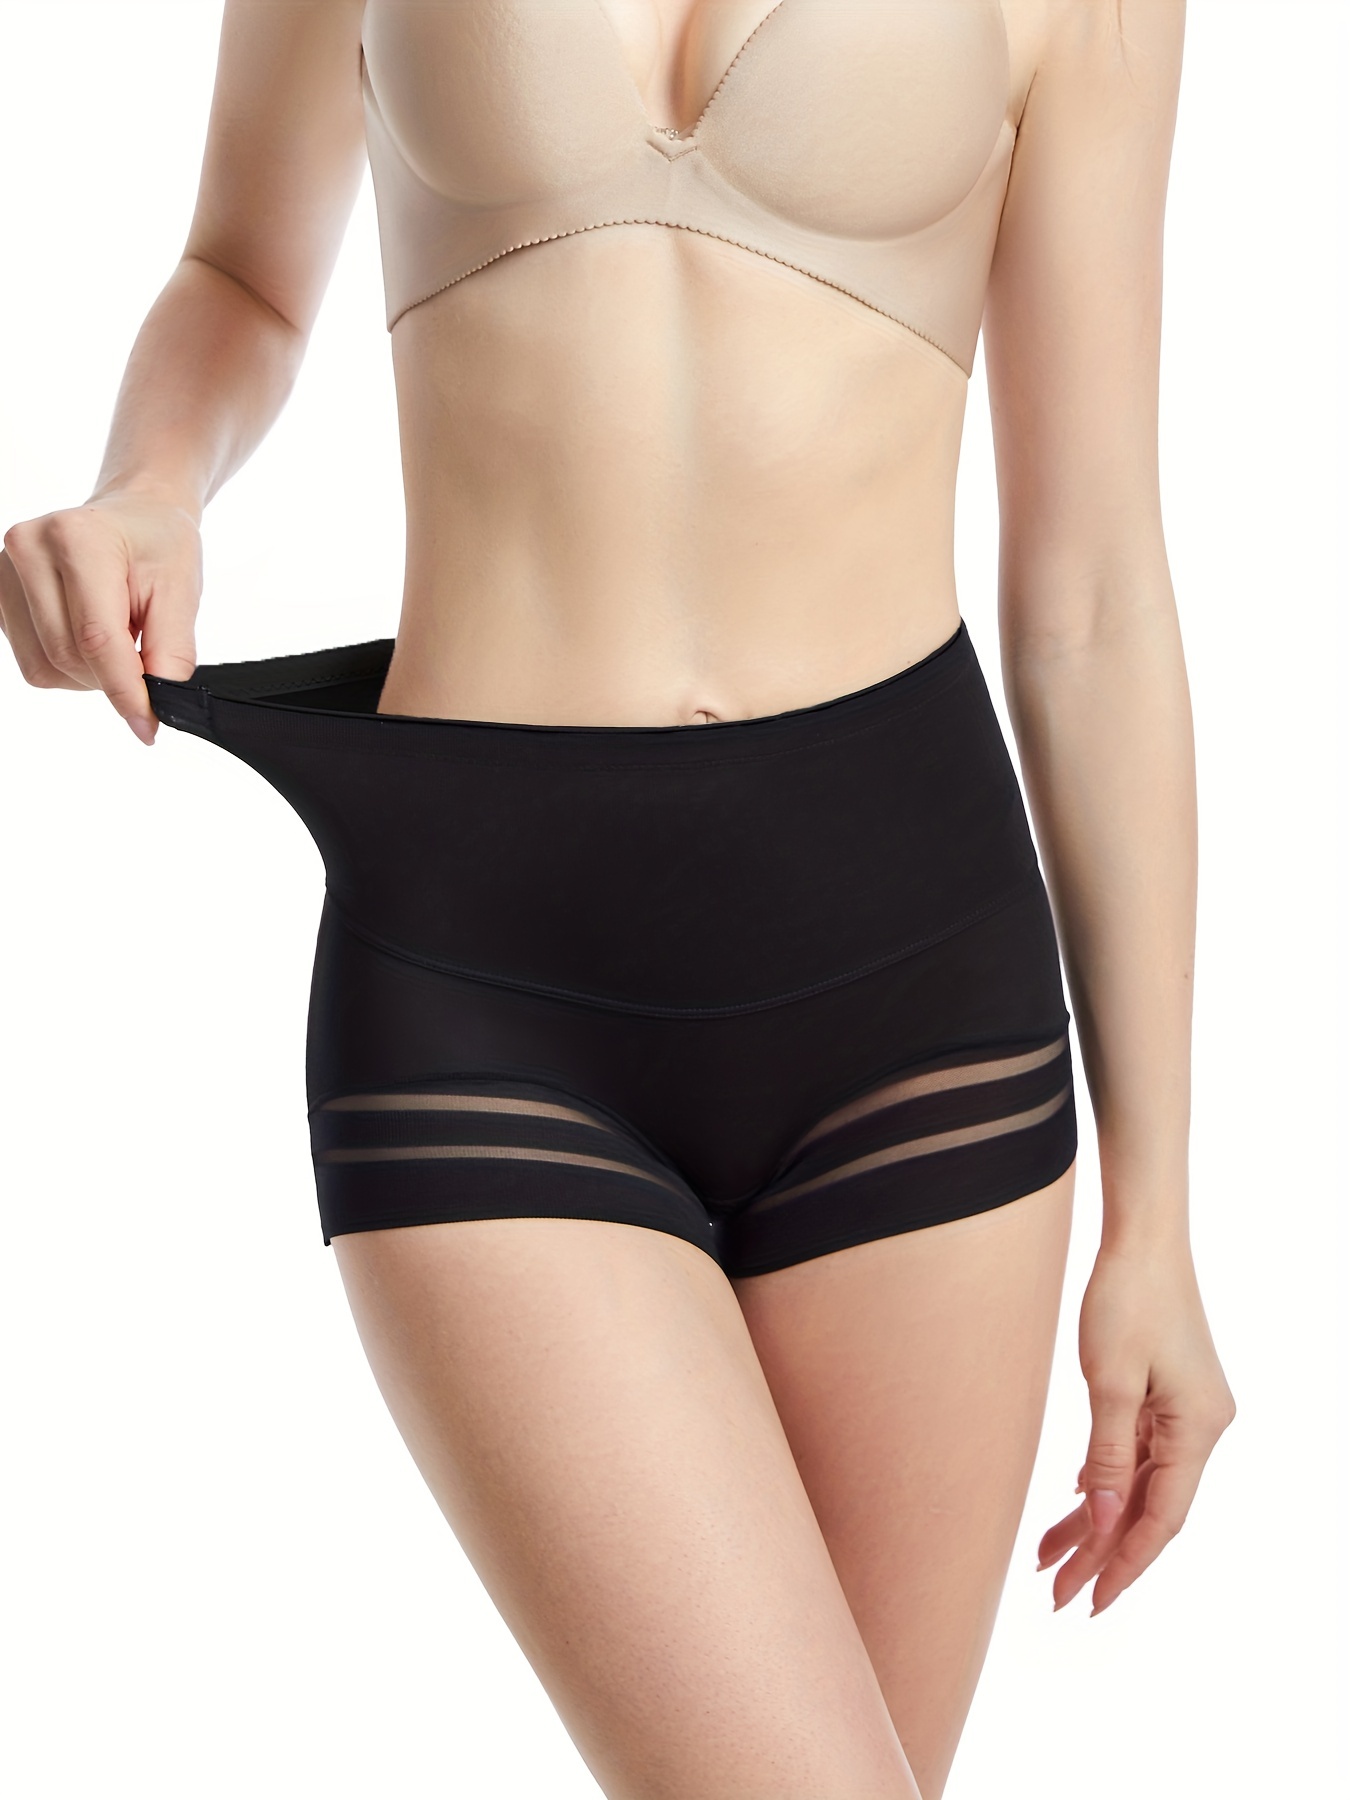 Seamless Shaping Panties, Breathable Comfy High Waist Tummy Control Slimmer  Panties, Women's Underwear & Shapewear